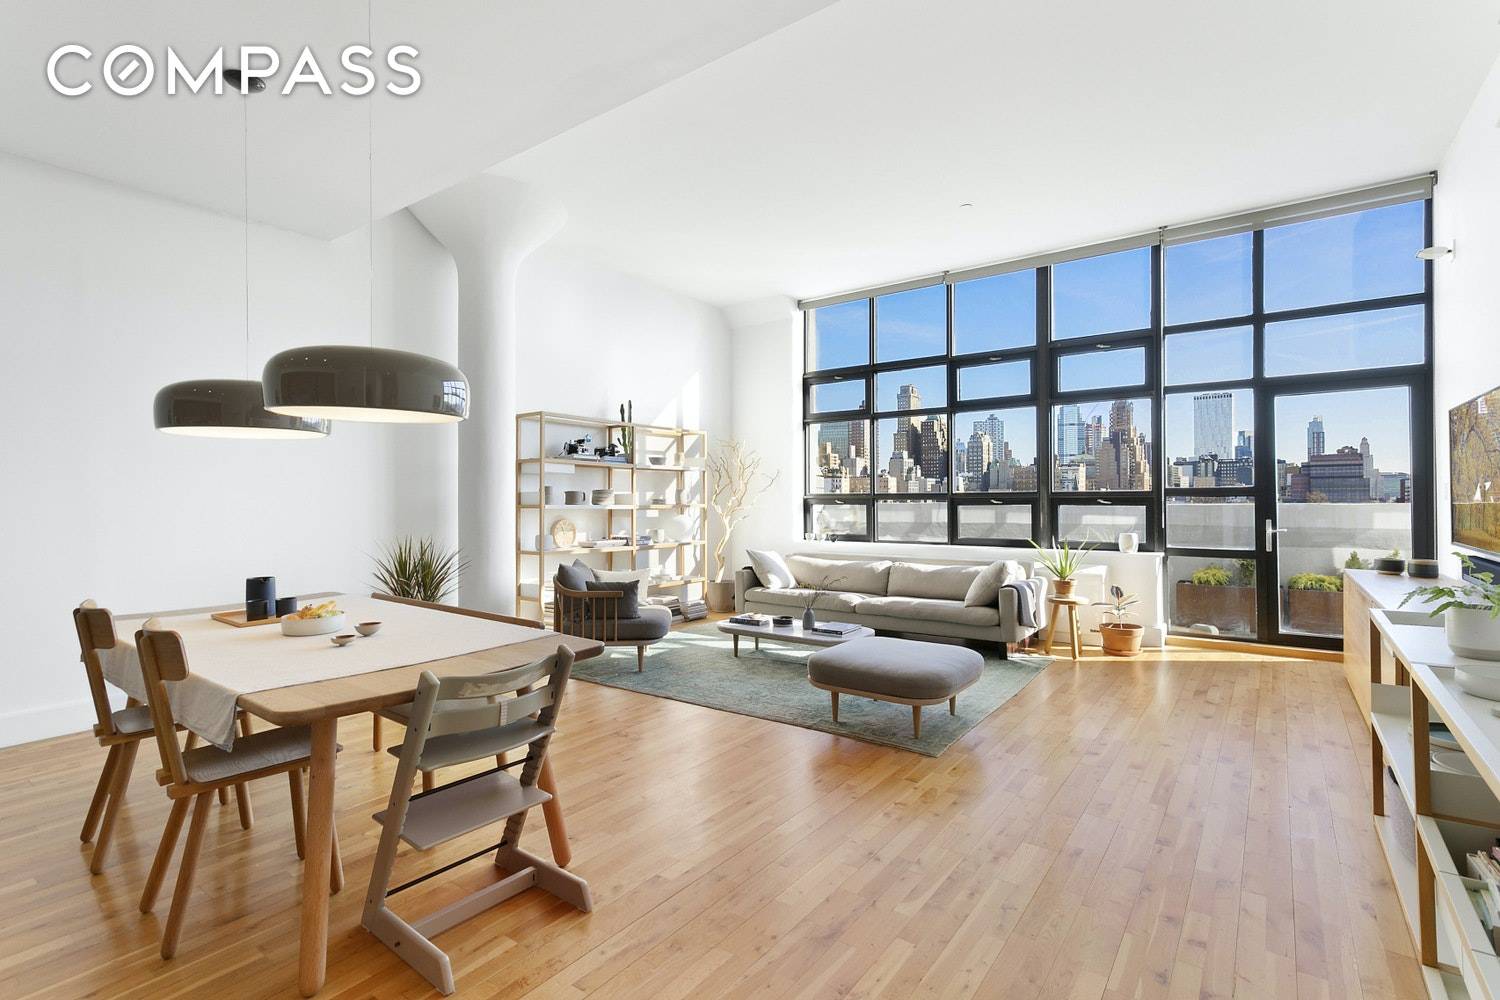 Stunning 1, 493 s f condo loft apt with your own 186 s f terrace enjoying unobstructed eastern views of downtown Brooklyn skyline and sunrises This stunning 2 Bedroom 2 ...